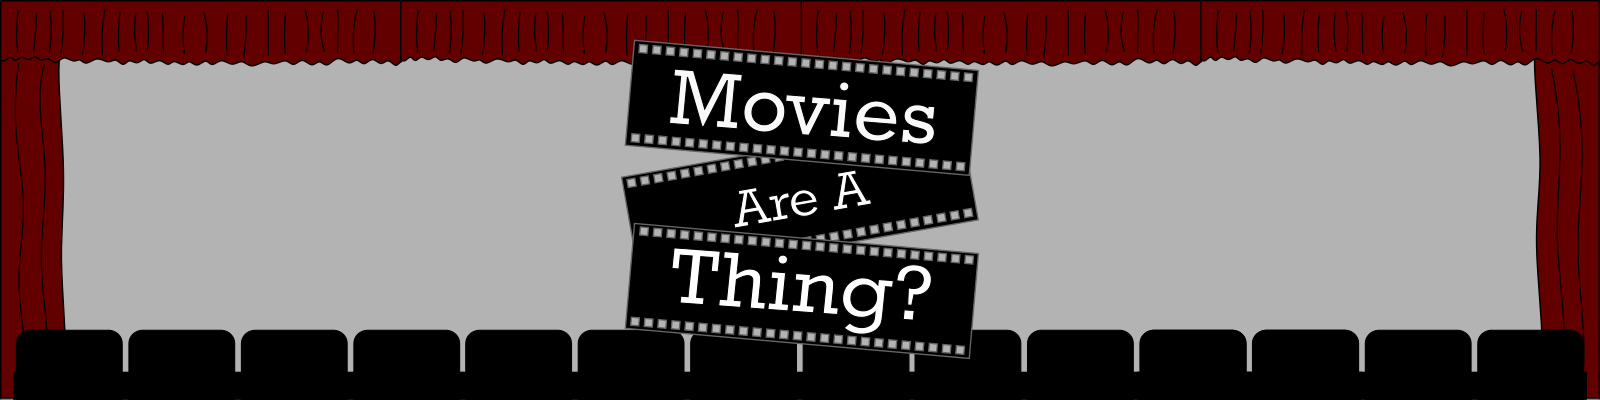 Movies Are A Thing?